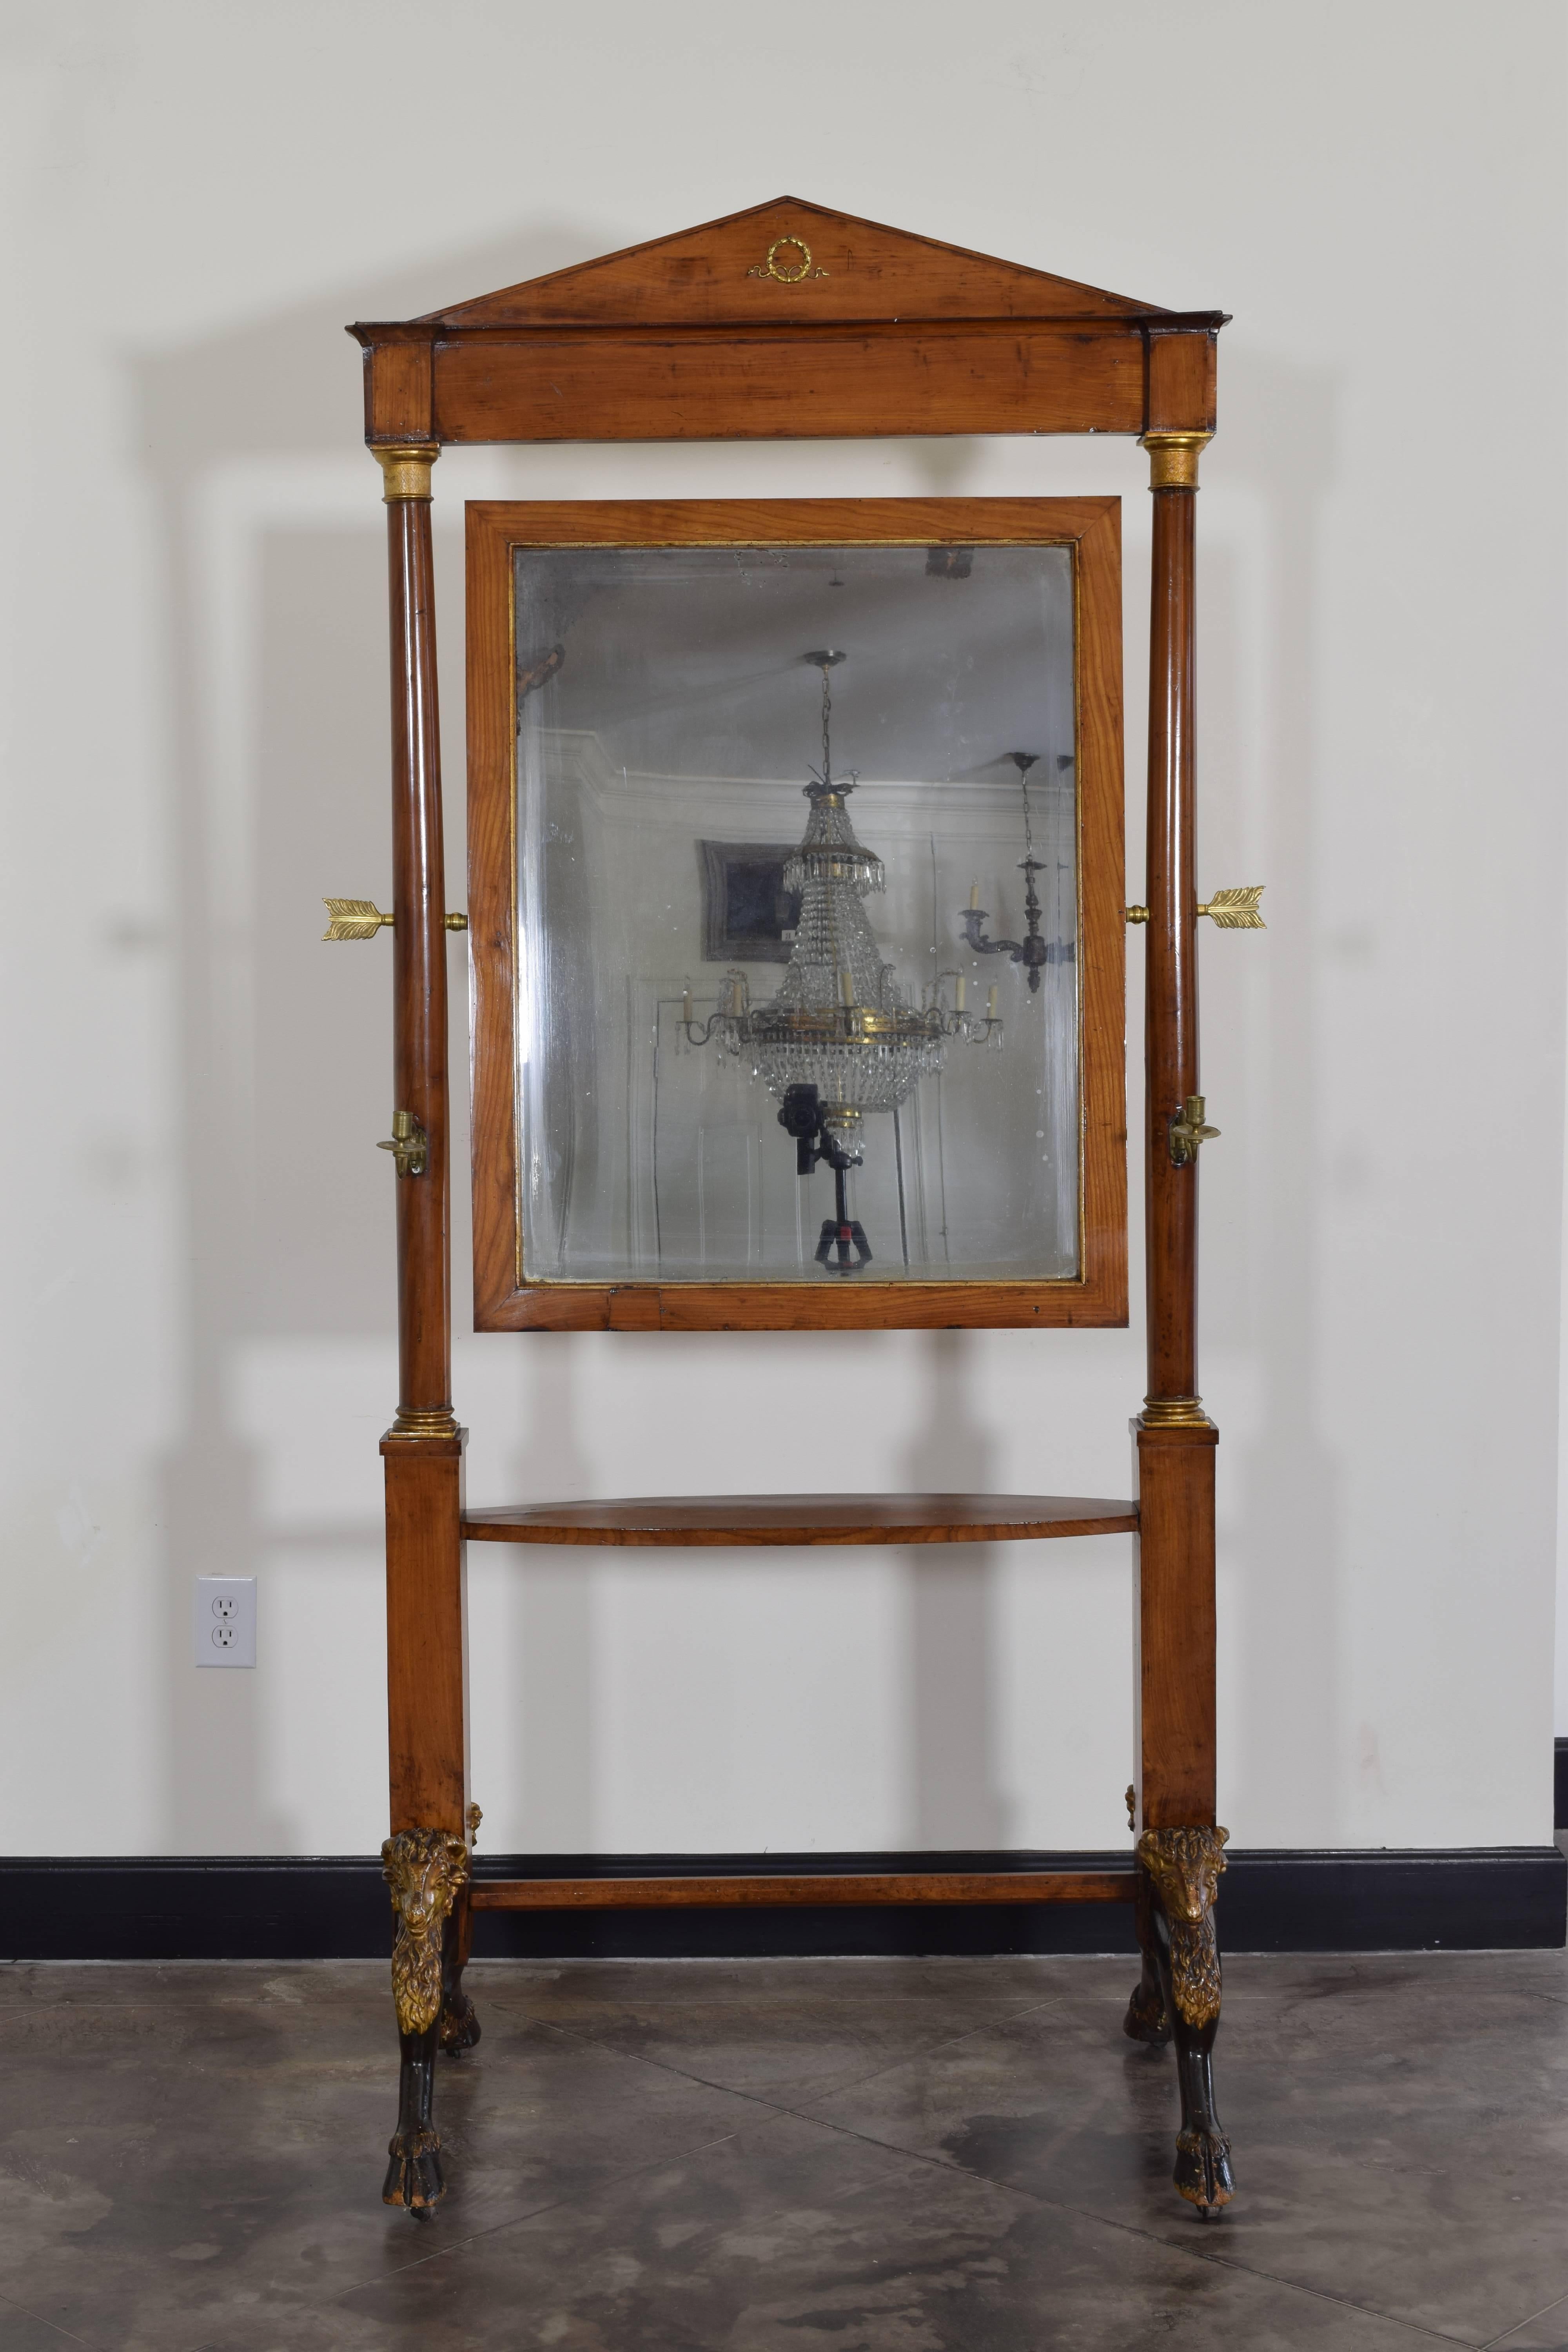 important and rare and completely intact, retaining antique beveled mirrorplate, the pivoting mirror held in place within the columned frame by brass arrow parts, the frame surmounted by a neoclassical pediment adorned with brass decoration, below